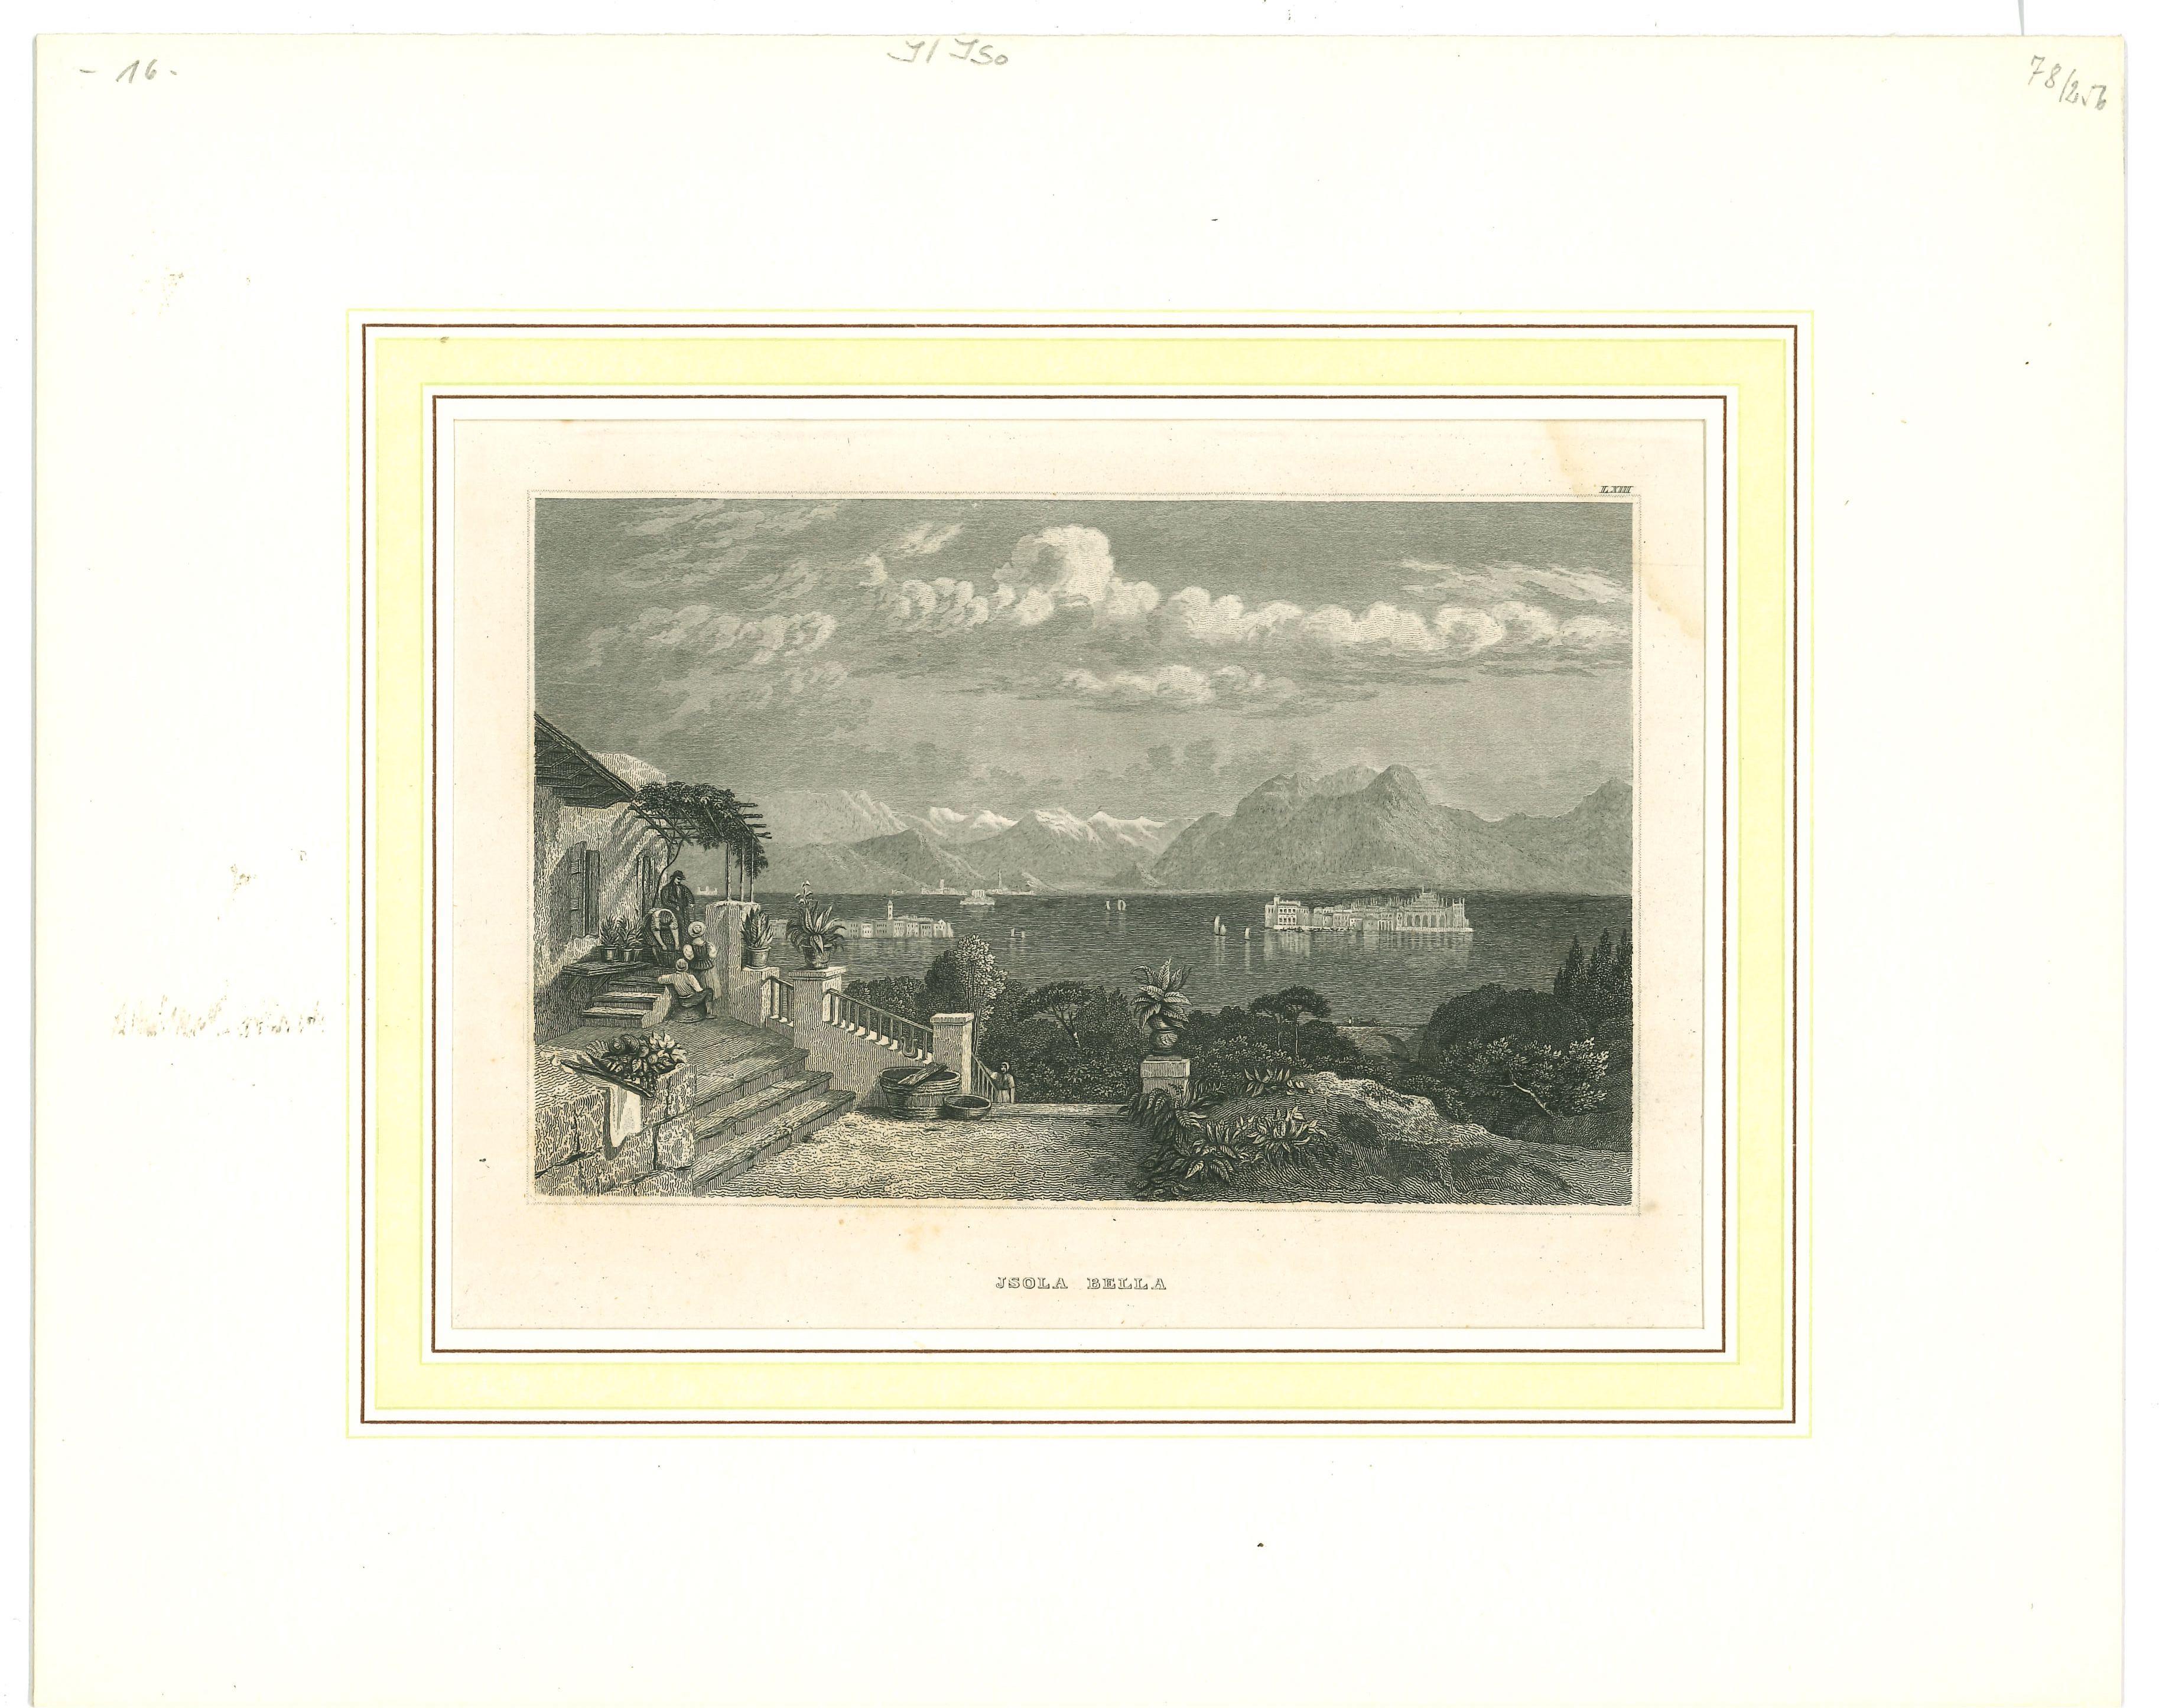 Unknown Landscape Print - Ancient View of Isola Bella - Original Lithograph - Early 19th Century